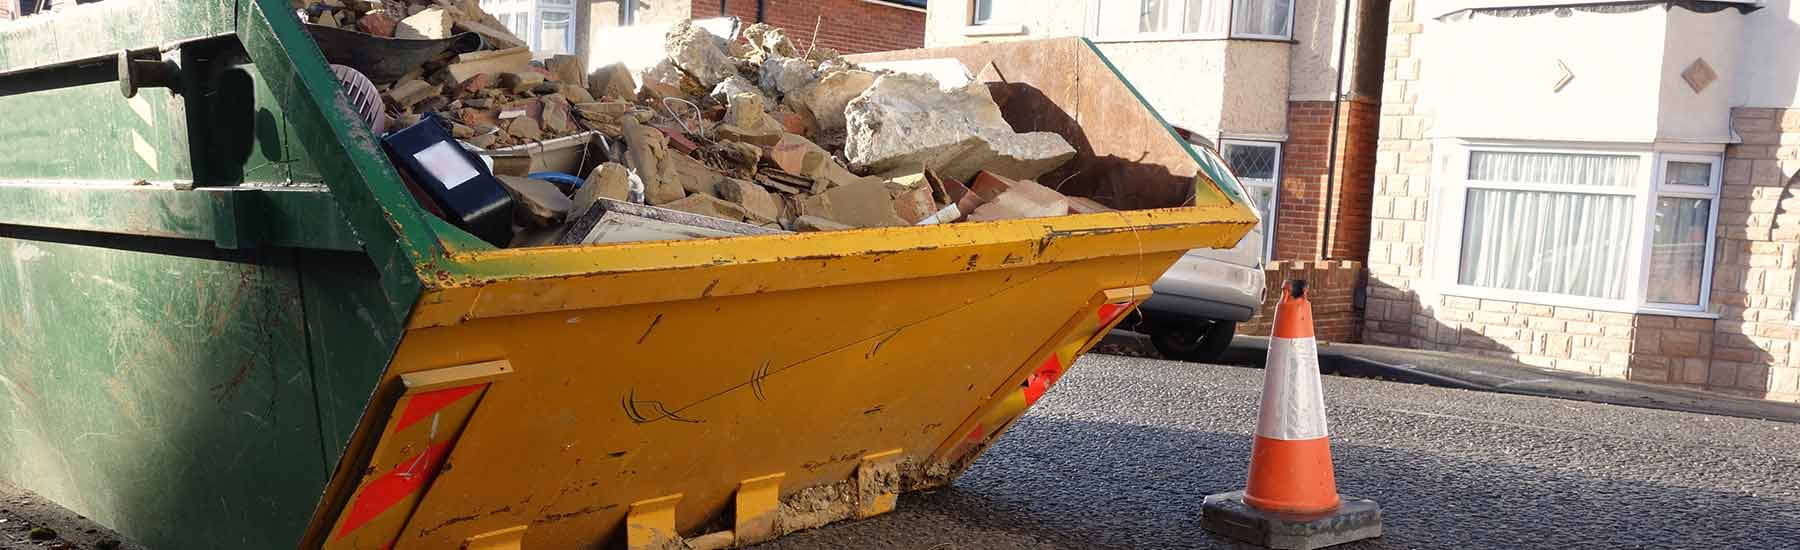 Reliable Skip Hire Isle of Wight